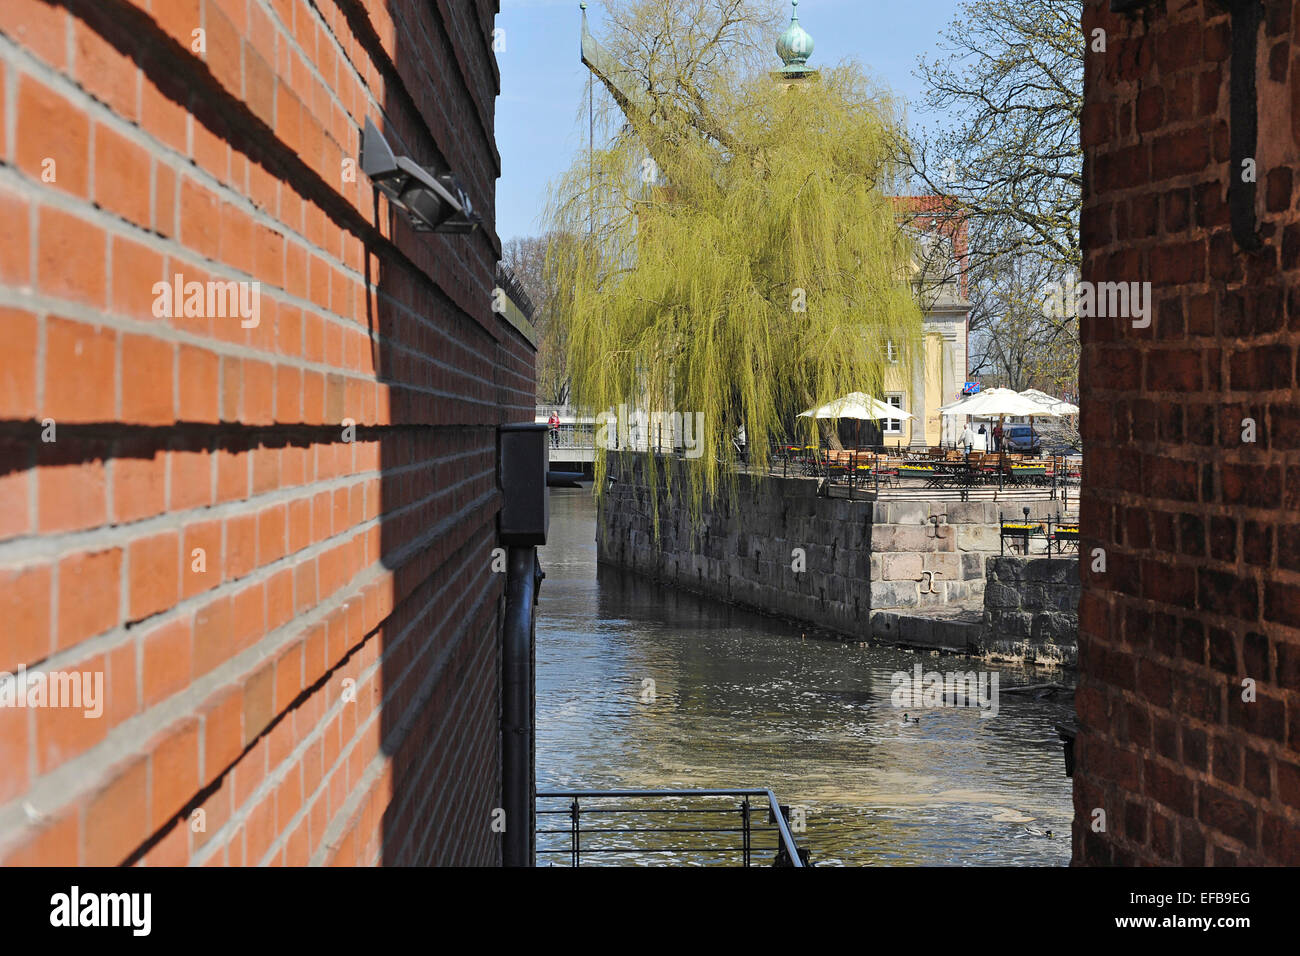 View through a gap between the walls from the historic mill buildings at the river Ilmenau and an open-air pub, 21 April 2013 Stock Photo